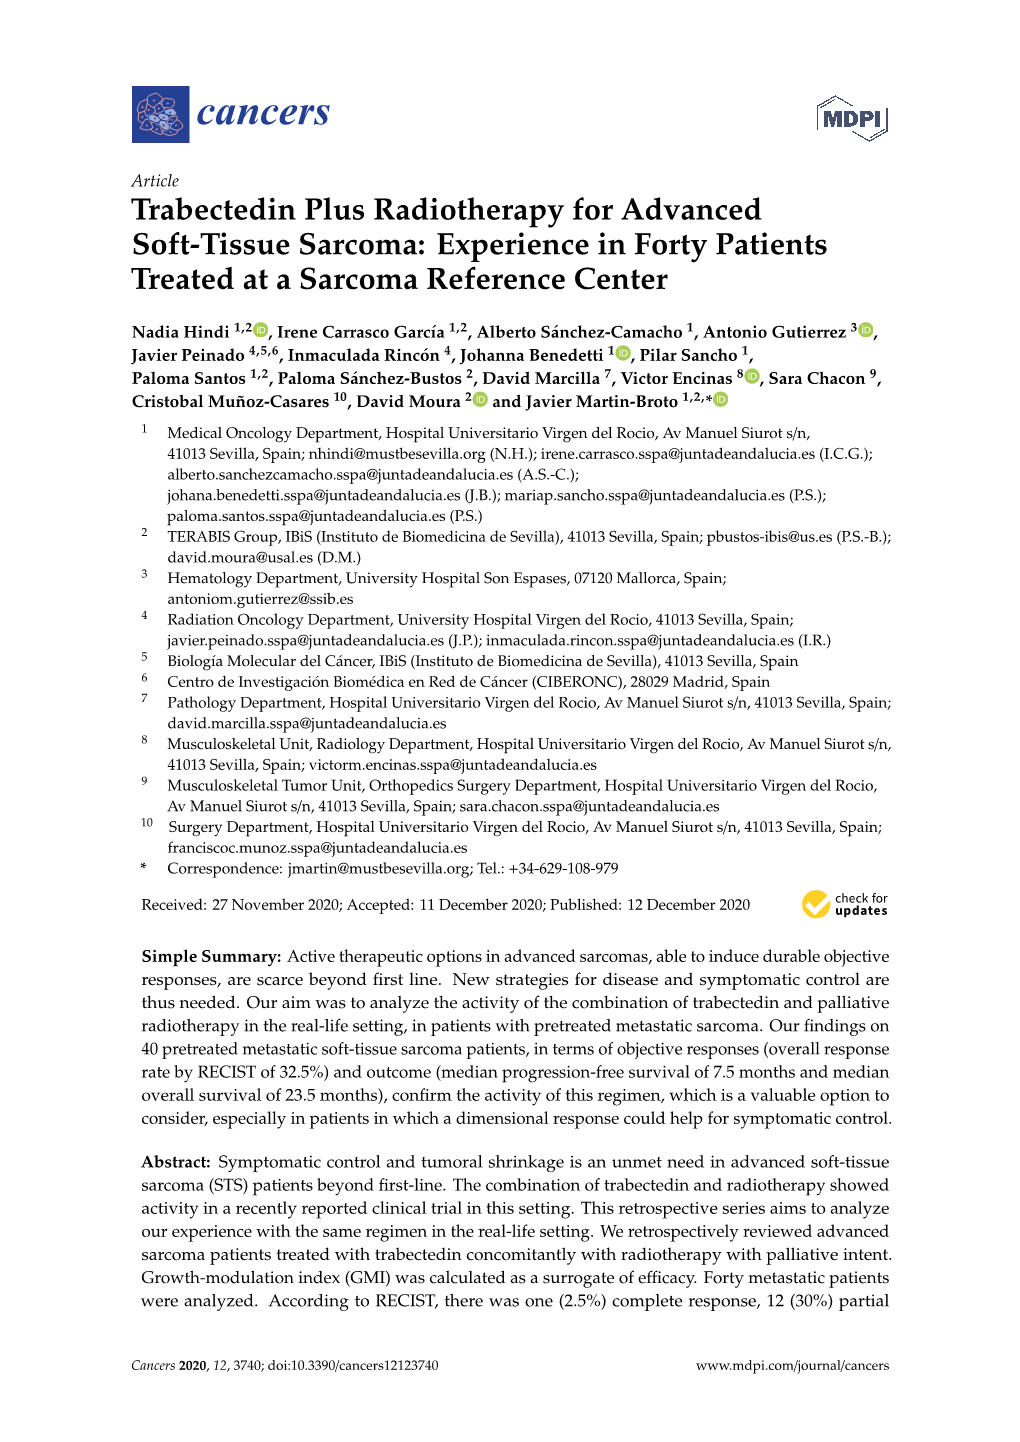 Trabectedin Plus Radiotherapy for Advanced Soft-Tissue Sarcoma: Experience in Forty Patients Treated at a Sarcoma Reference Center